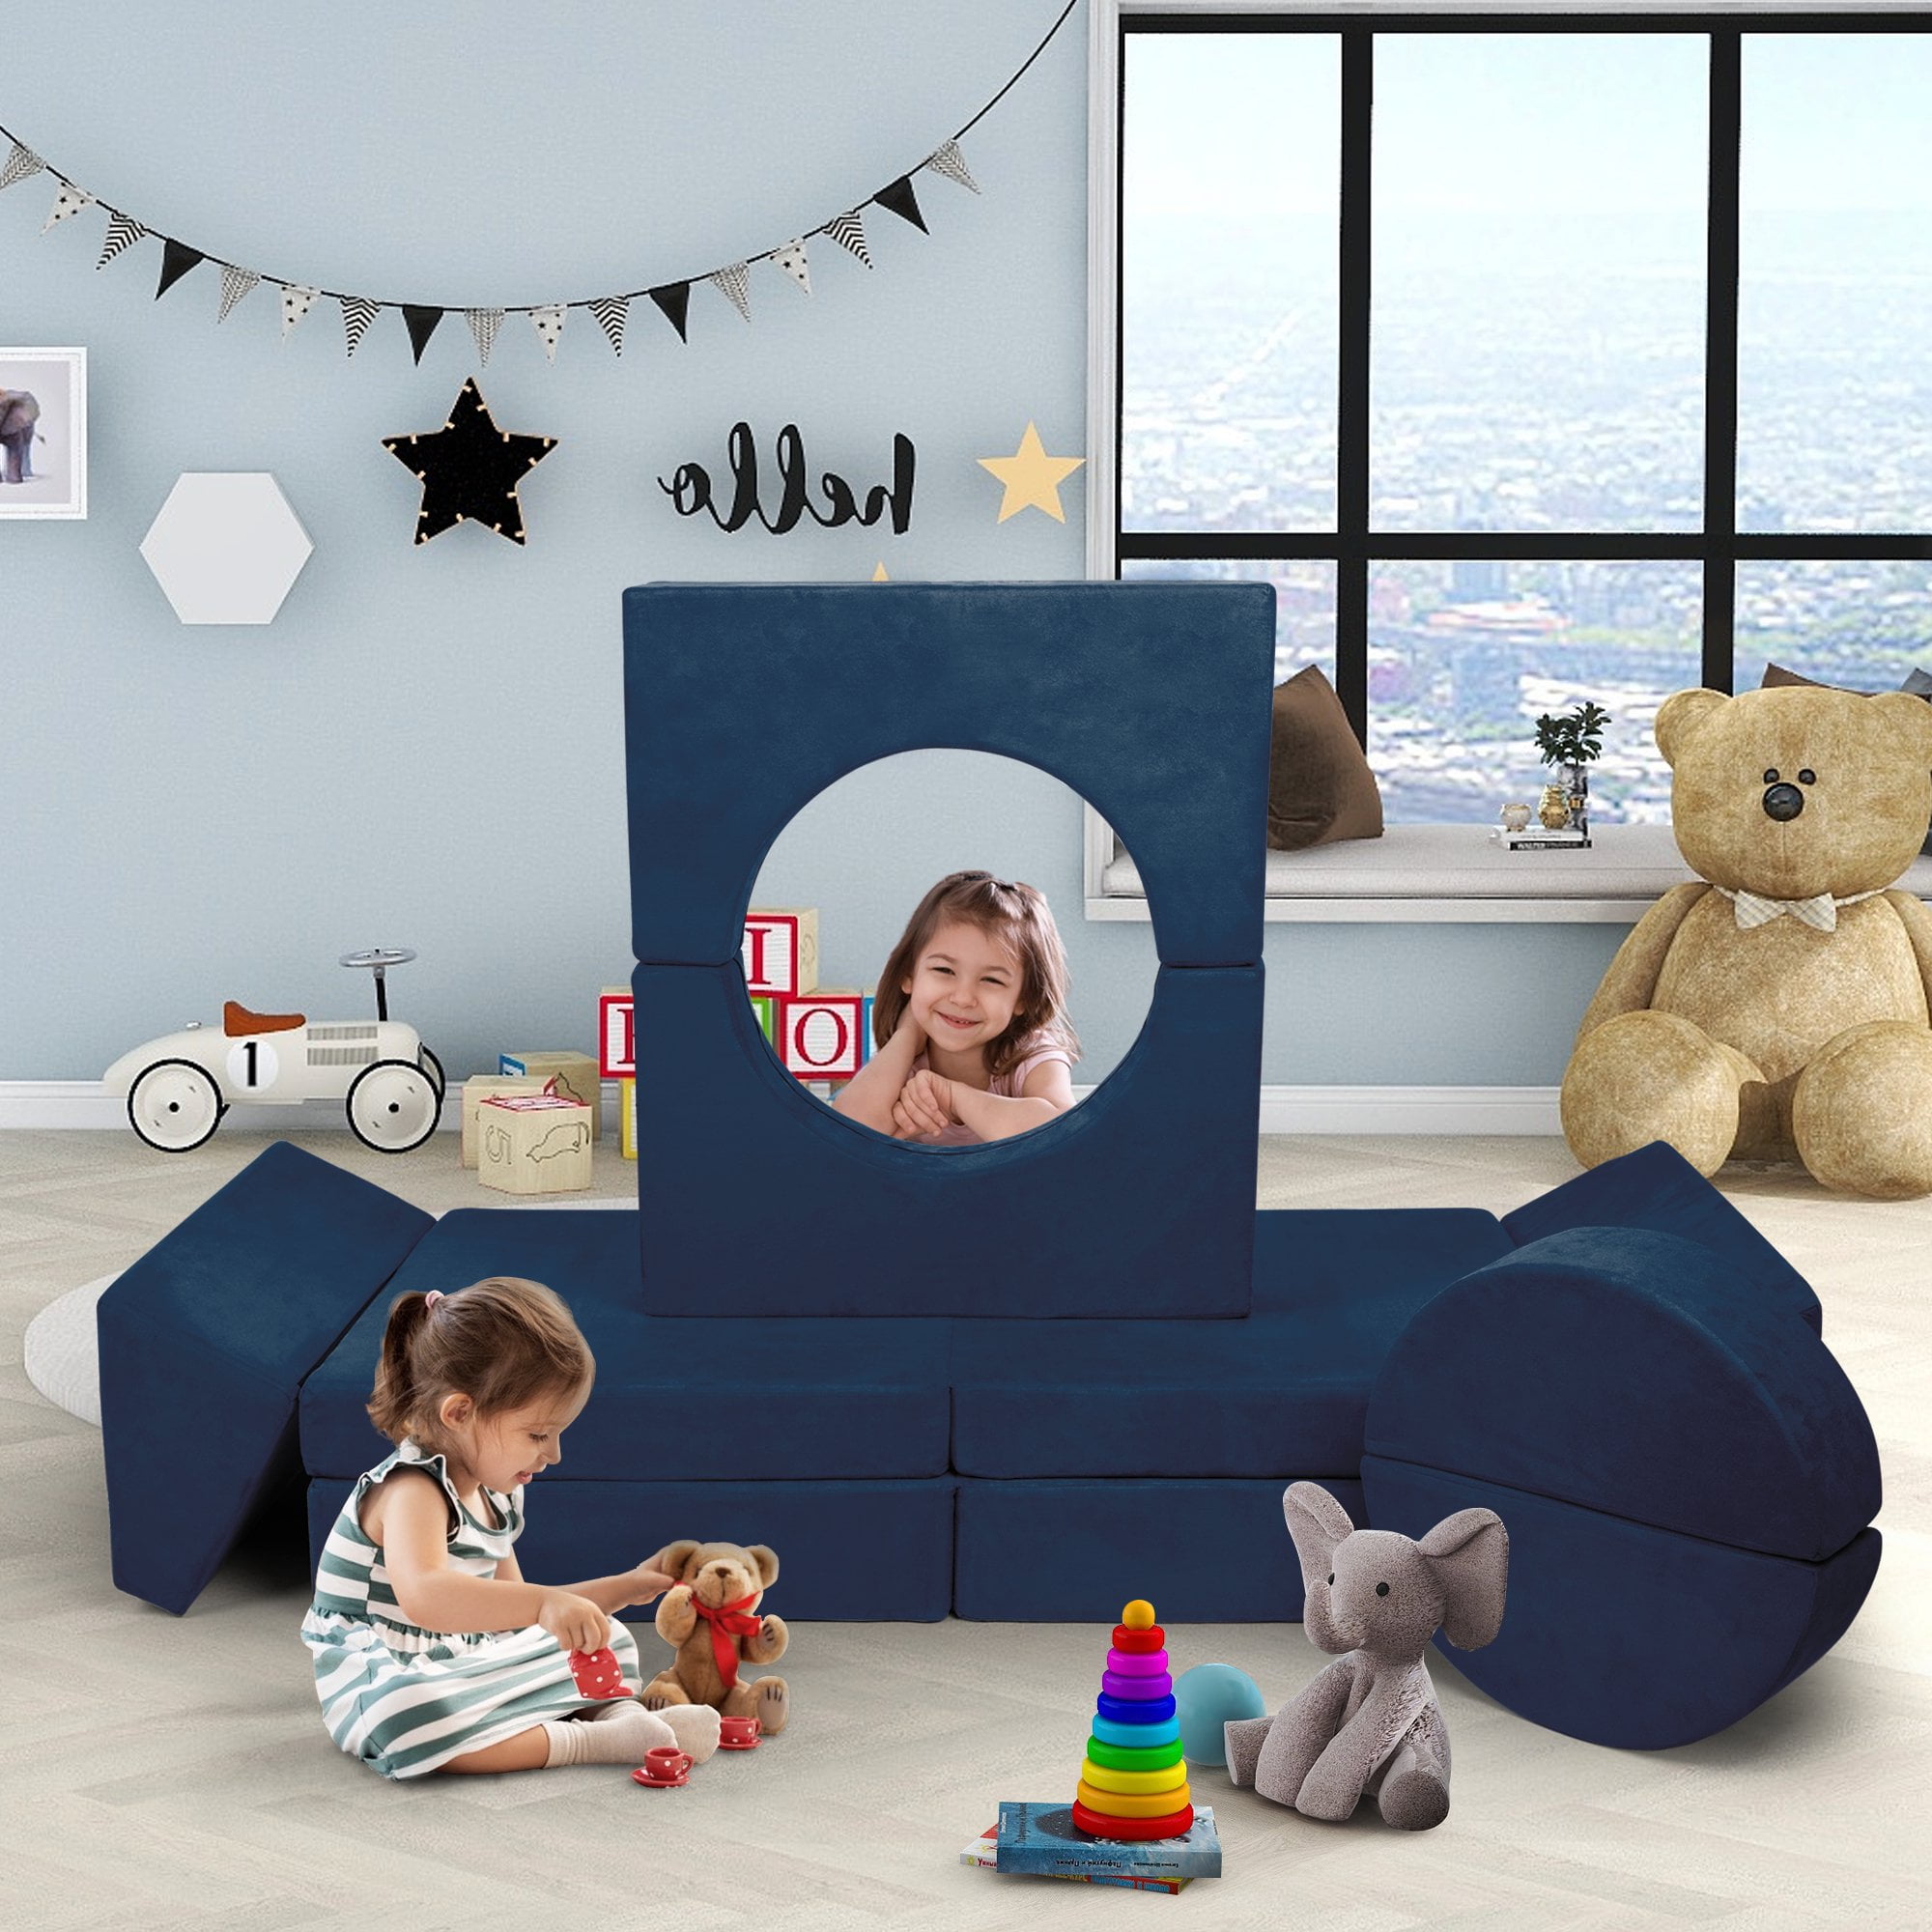 Convertible Furniture, Sofa, Imaginative Tolead Child Blue Couch Sectional Modular 8 Play Pcs Kids